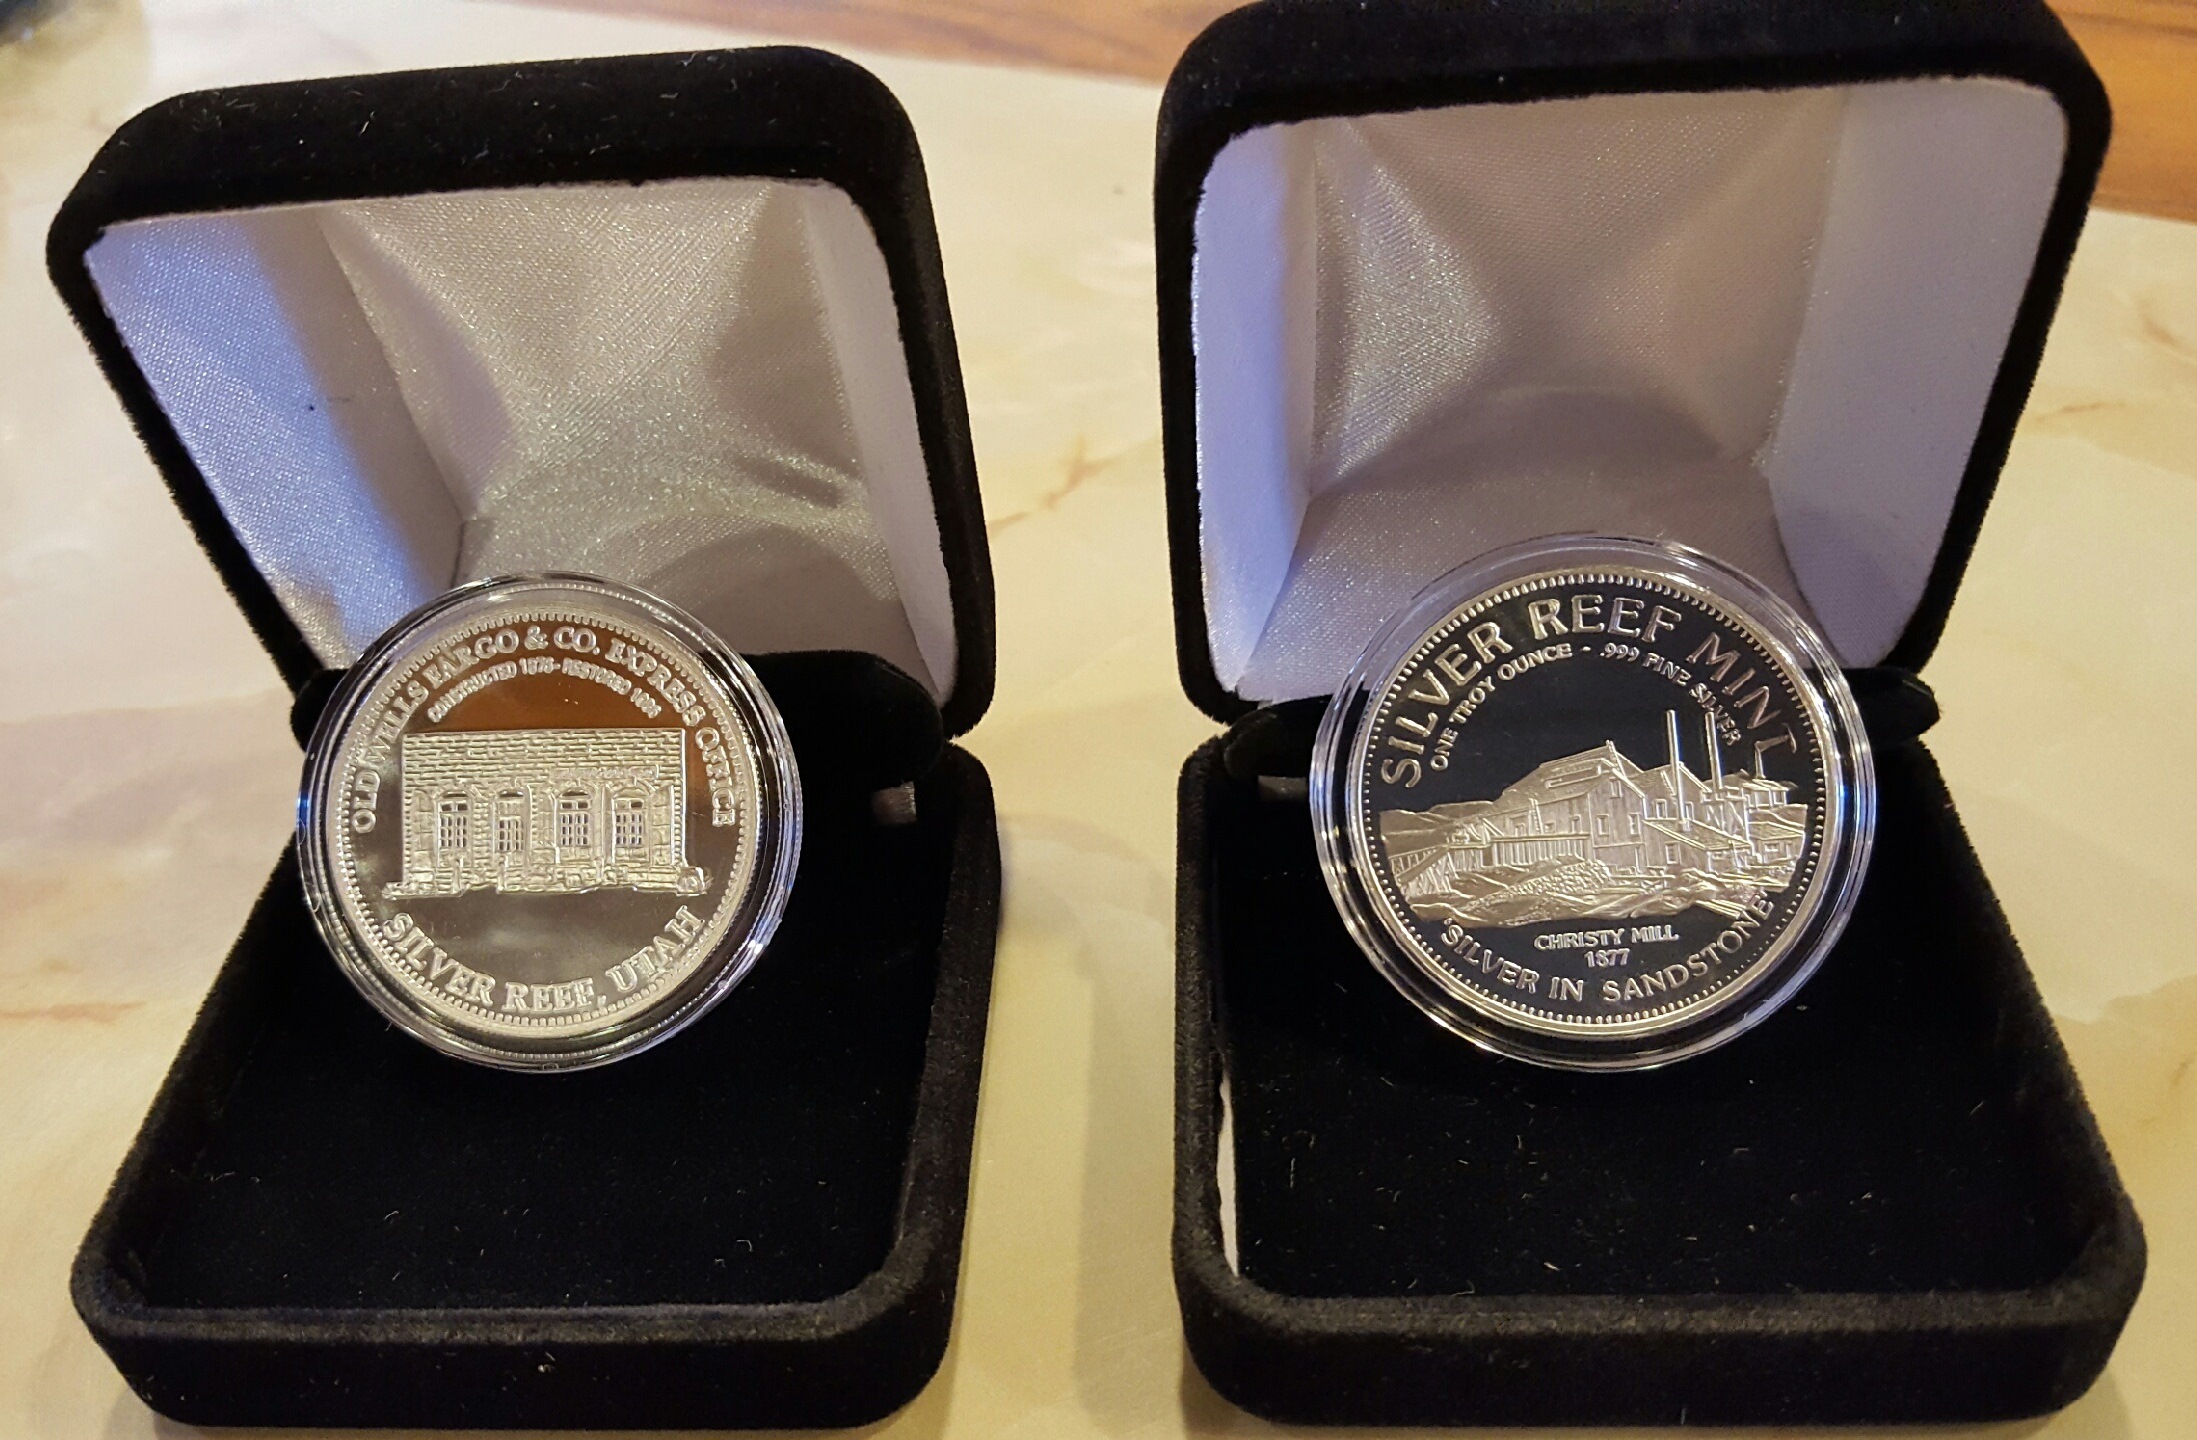 Silver Reef commemorative coins